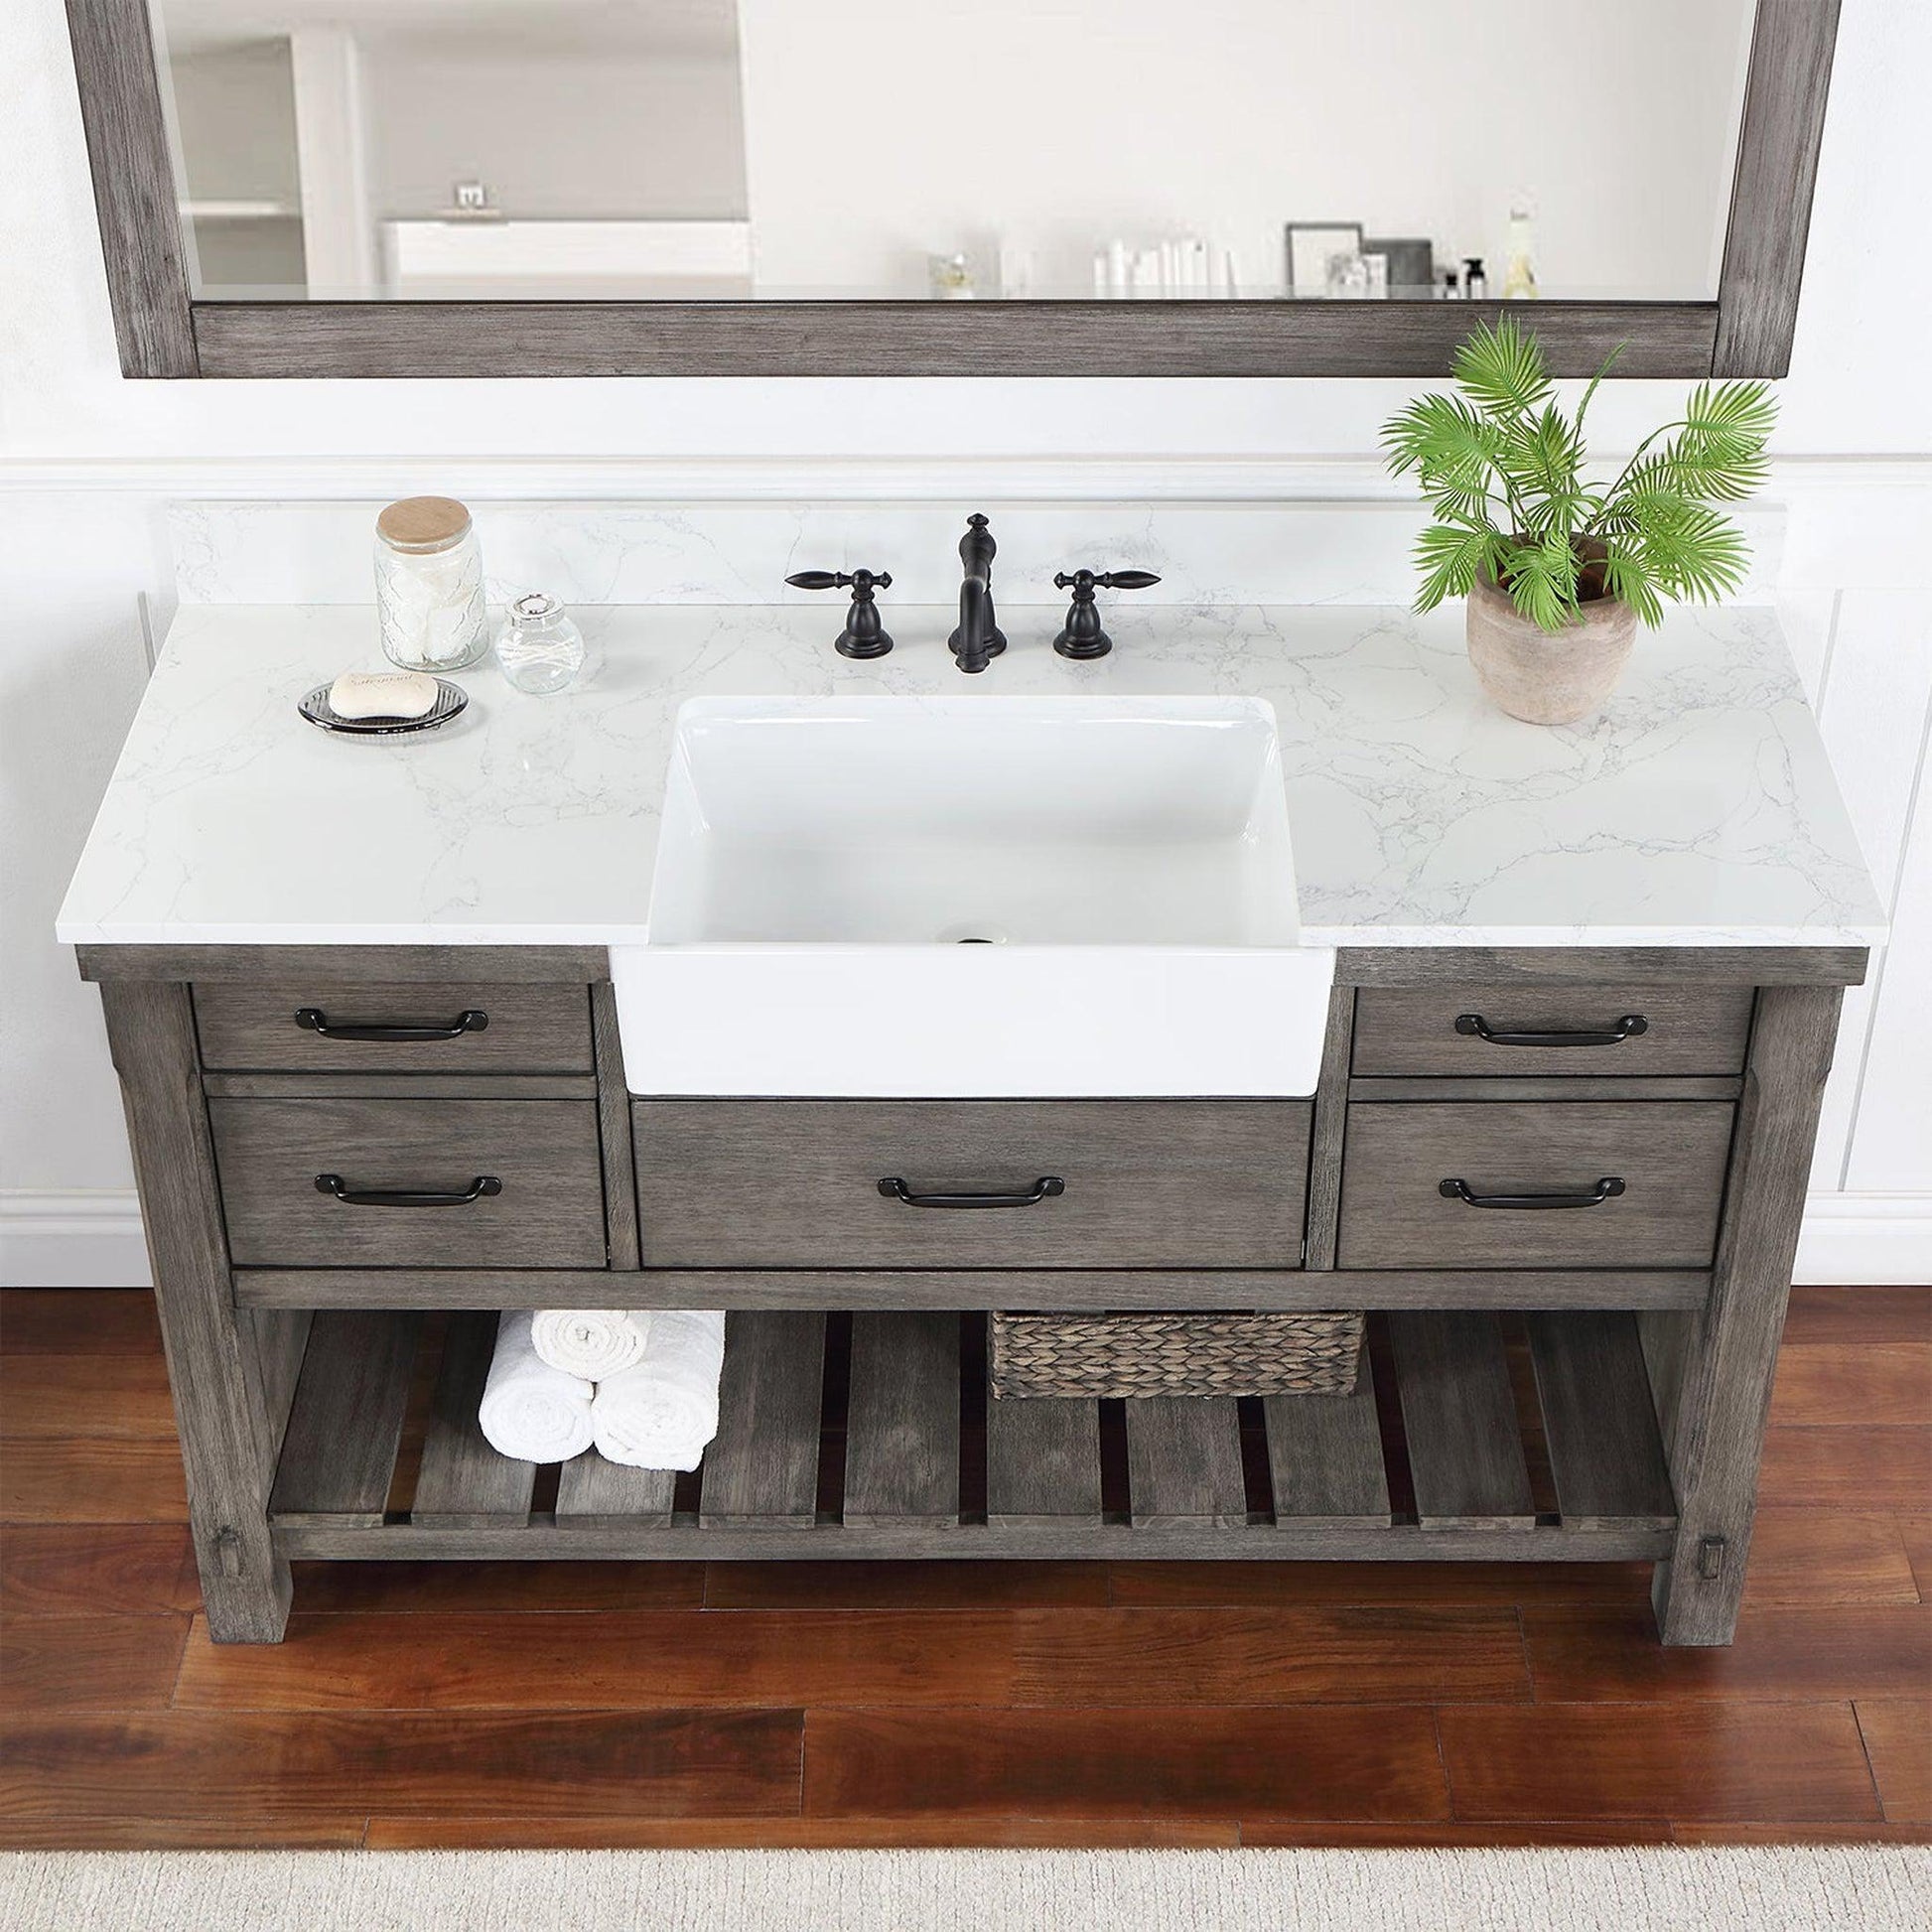 Vinnova Villareal 60" Single Bath Vanity In Classical Grey With Composite Stone Top In White Finish And White Farmhouse Basin And Mirror